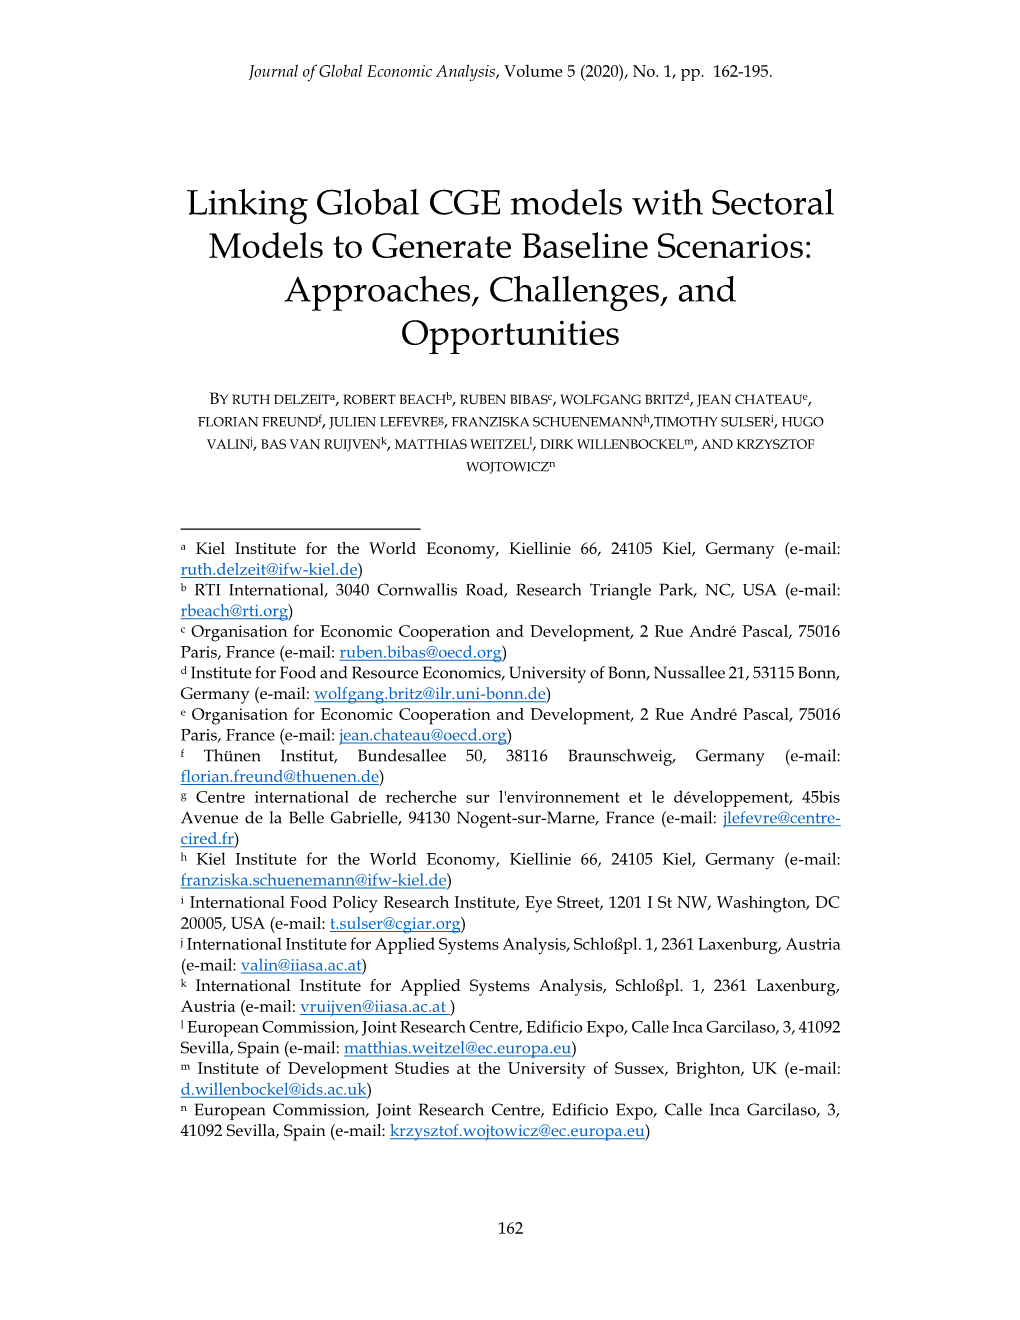 Linking Global CGE Models with Sectoral Models to Generate Baseline Scenarios: Approaches, Challenges, and Opportunities